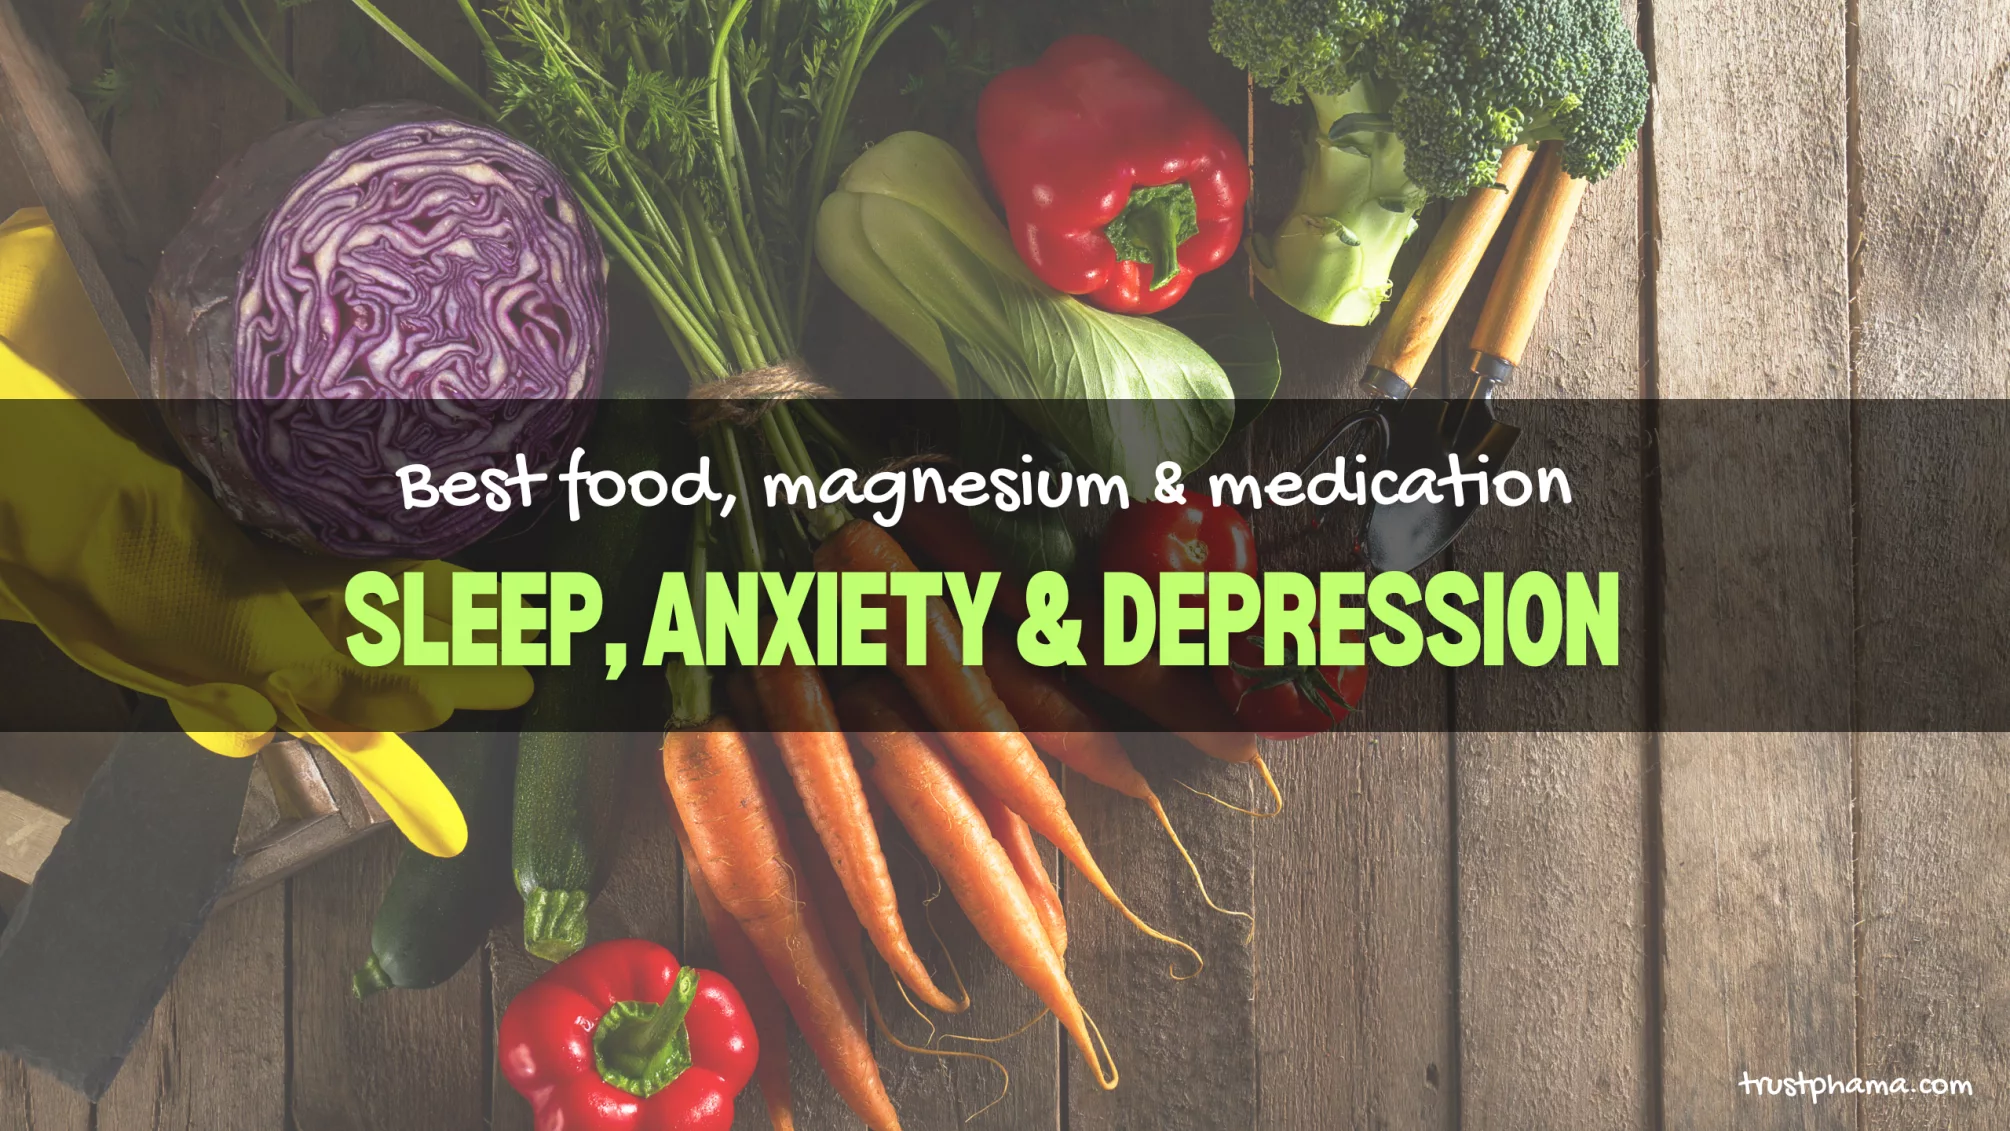 Best-Foods-Magnesium-and-Medication-for-Sleep-Anxiety-and-Depression-trustphama